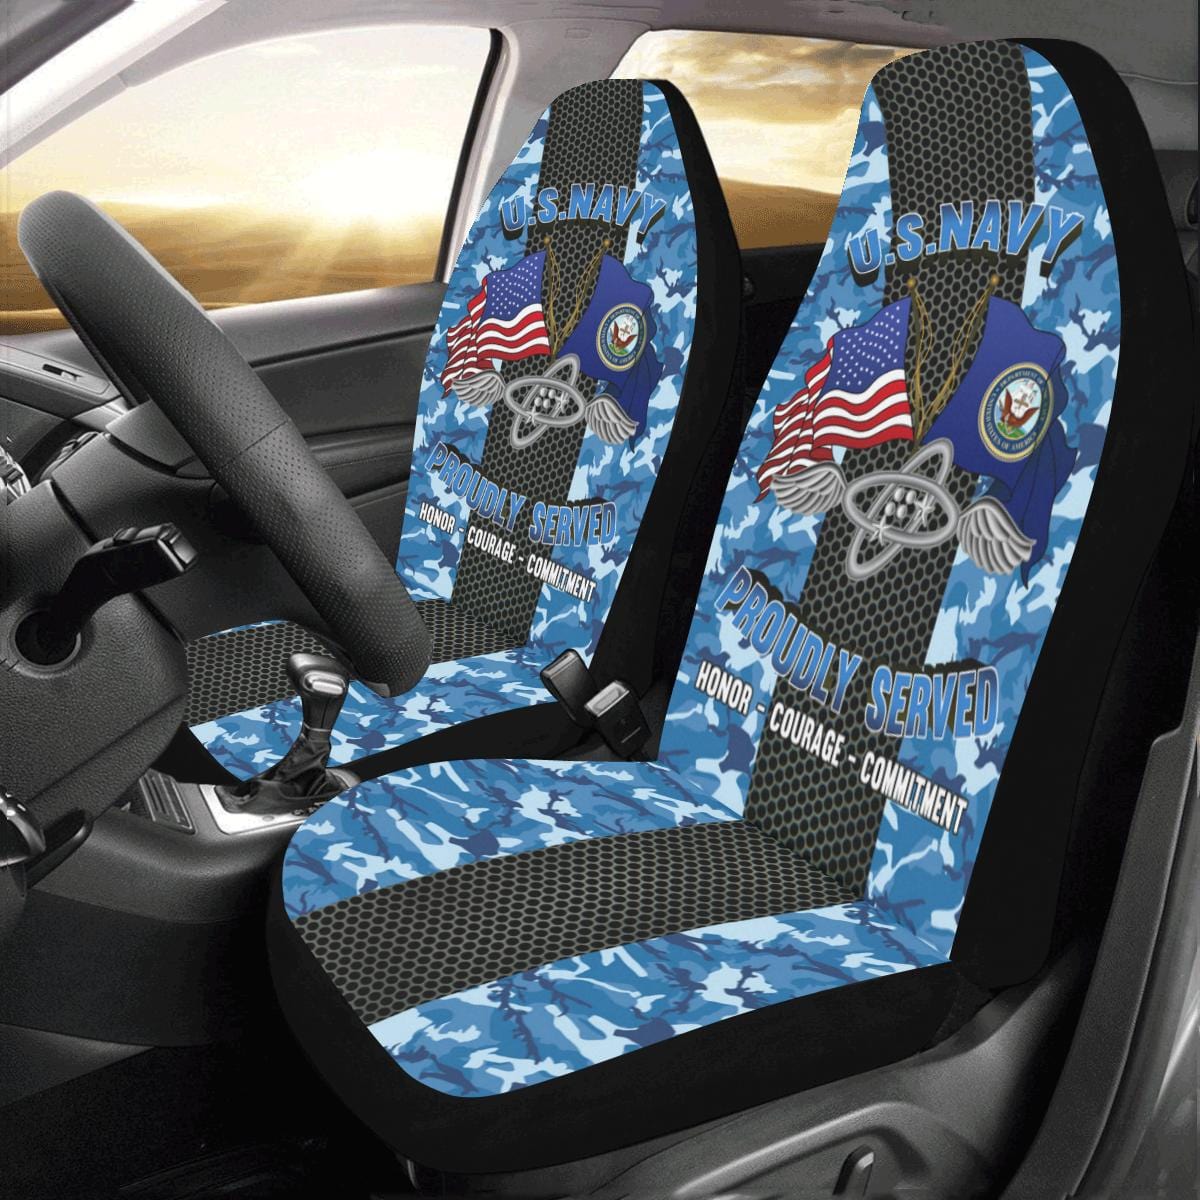 Navy Aviation Electronics Technician Navy AT Car Seat Covers (Set of 2)-SeatCovers-Navy-Rate-Veterans Nation